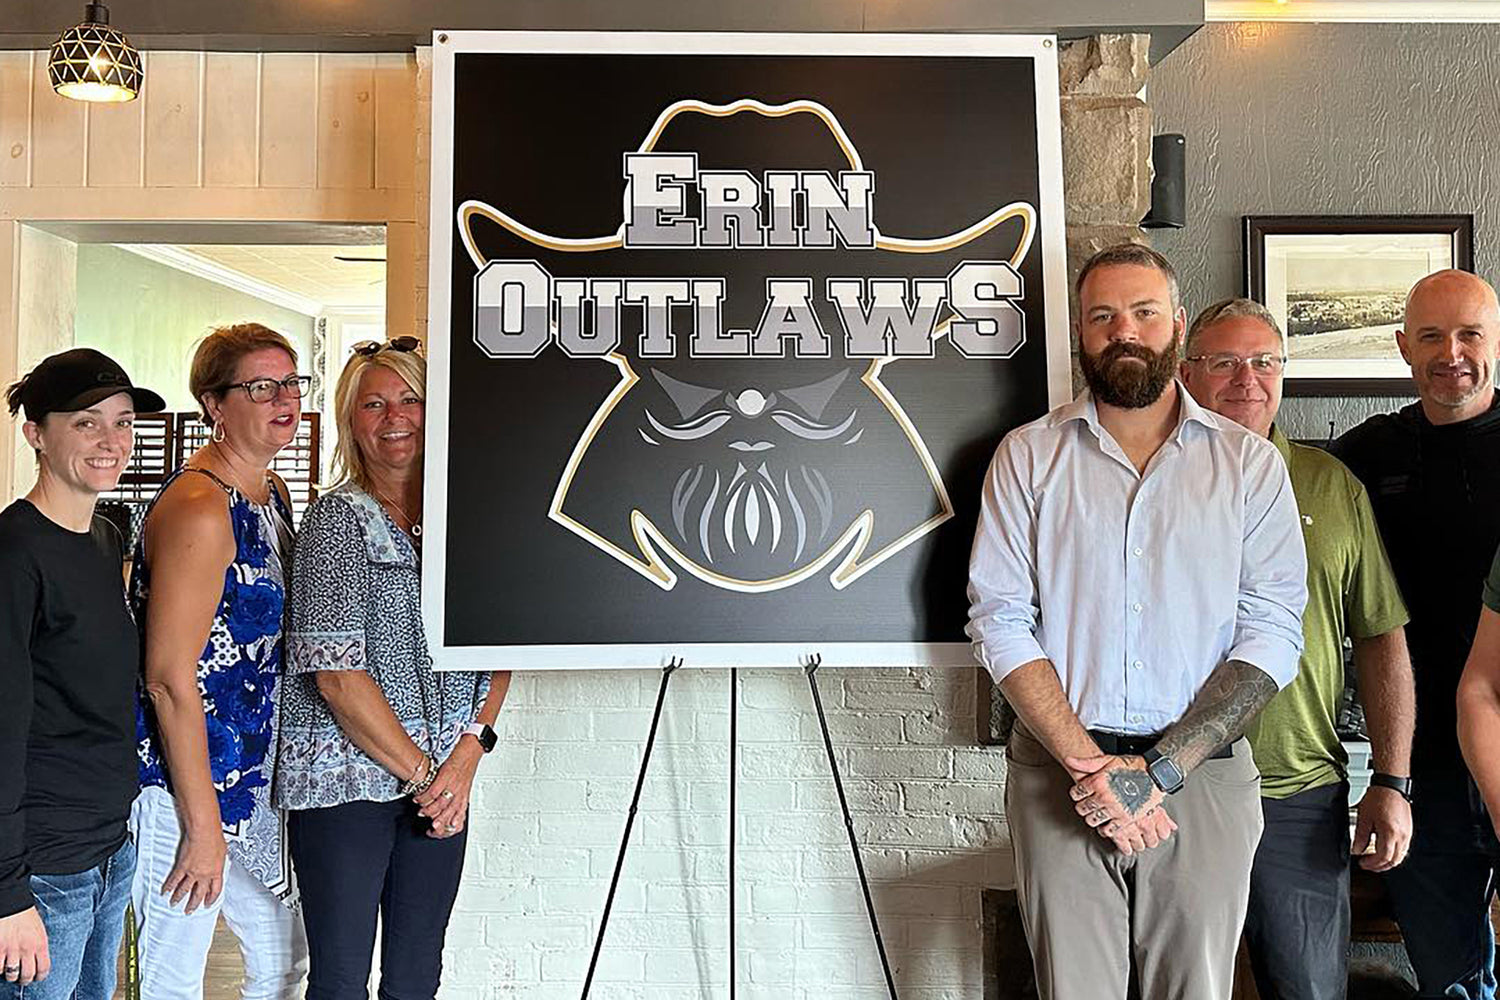 The launch of the Erin Outlaws